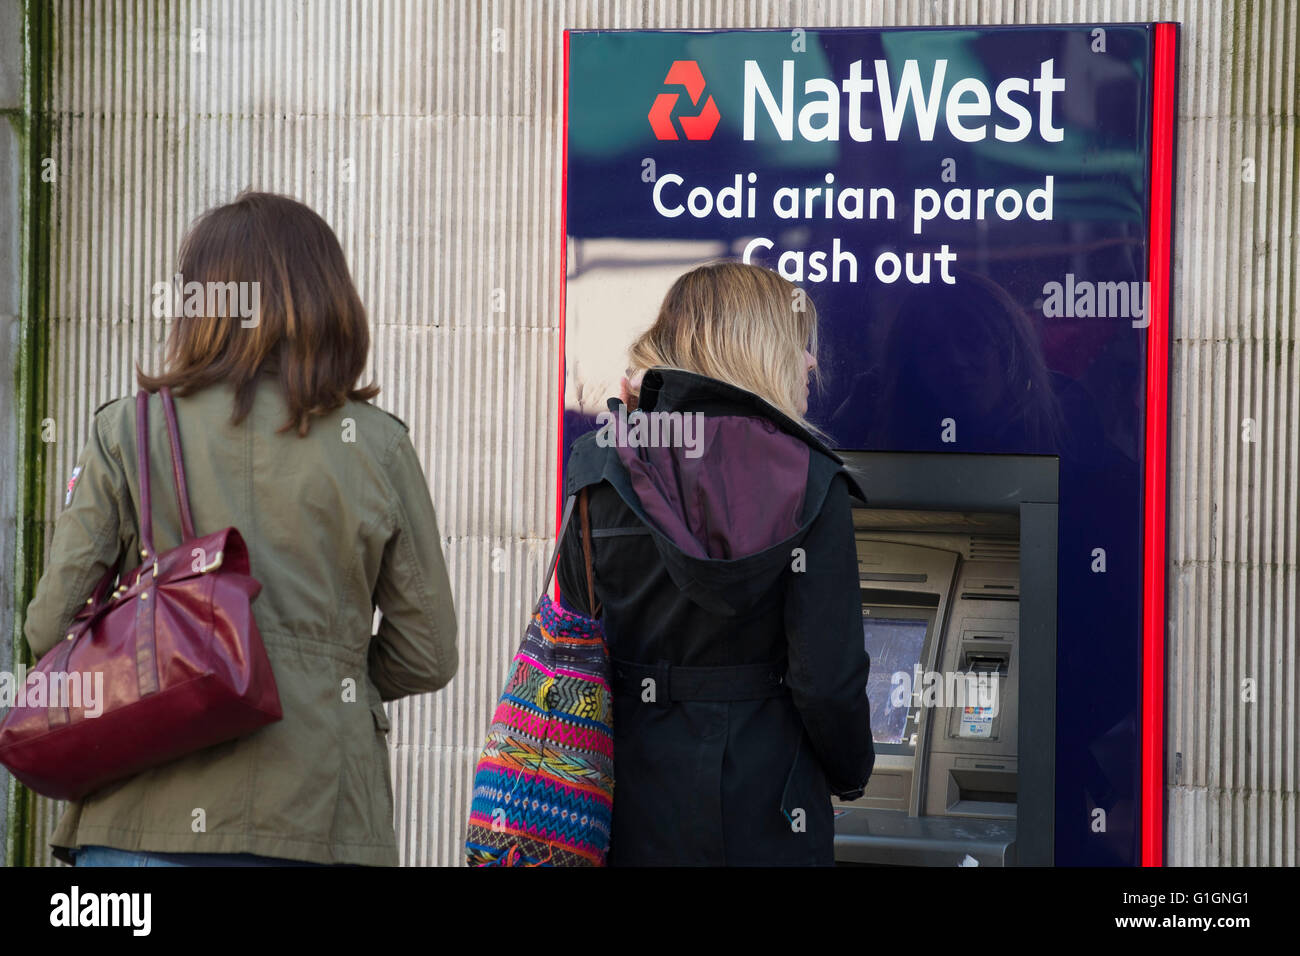 Natwest bank cash point (atm). Stock Photo